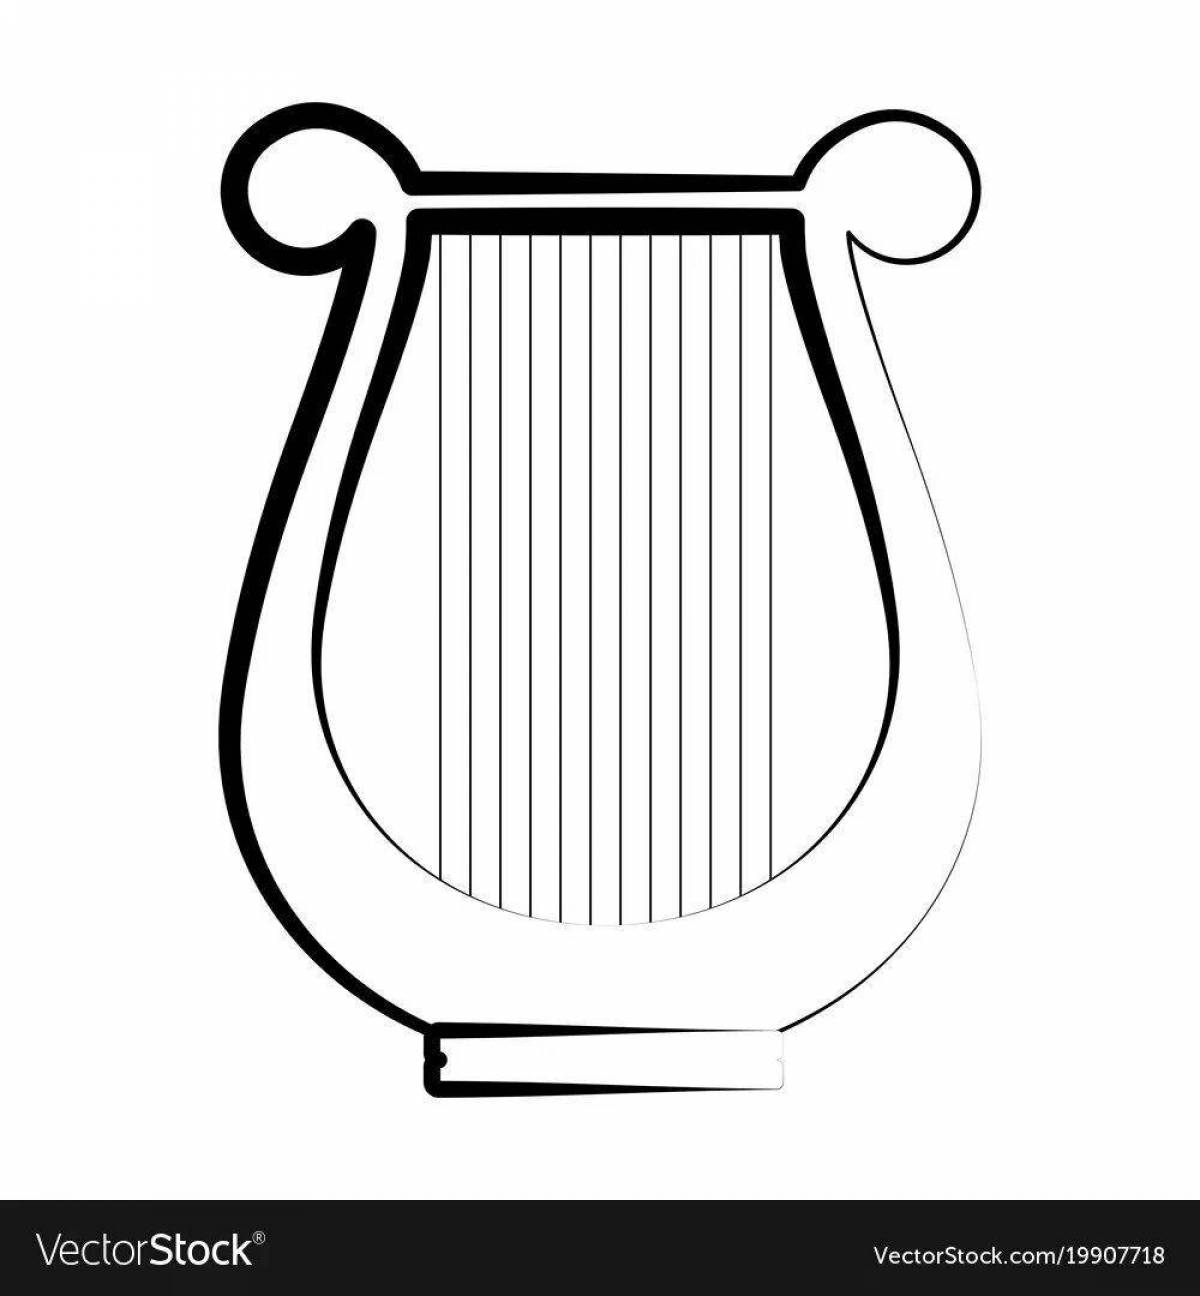 Coloring page dazzling lyre